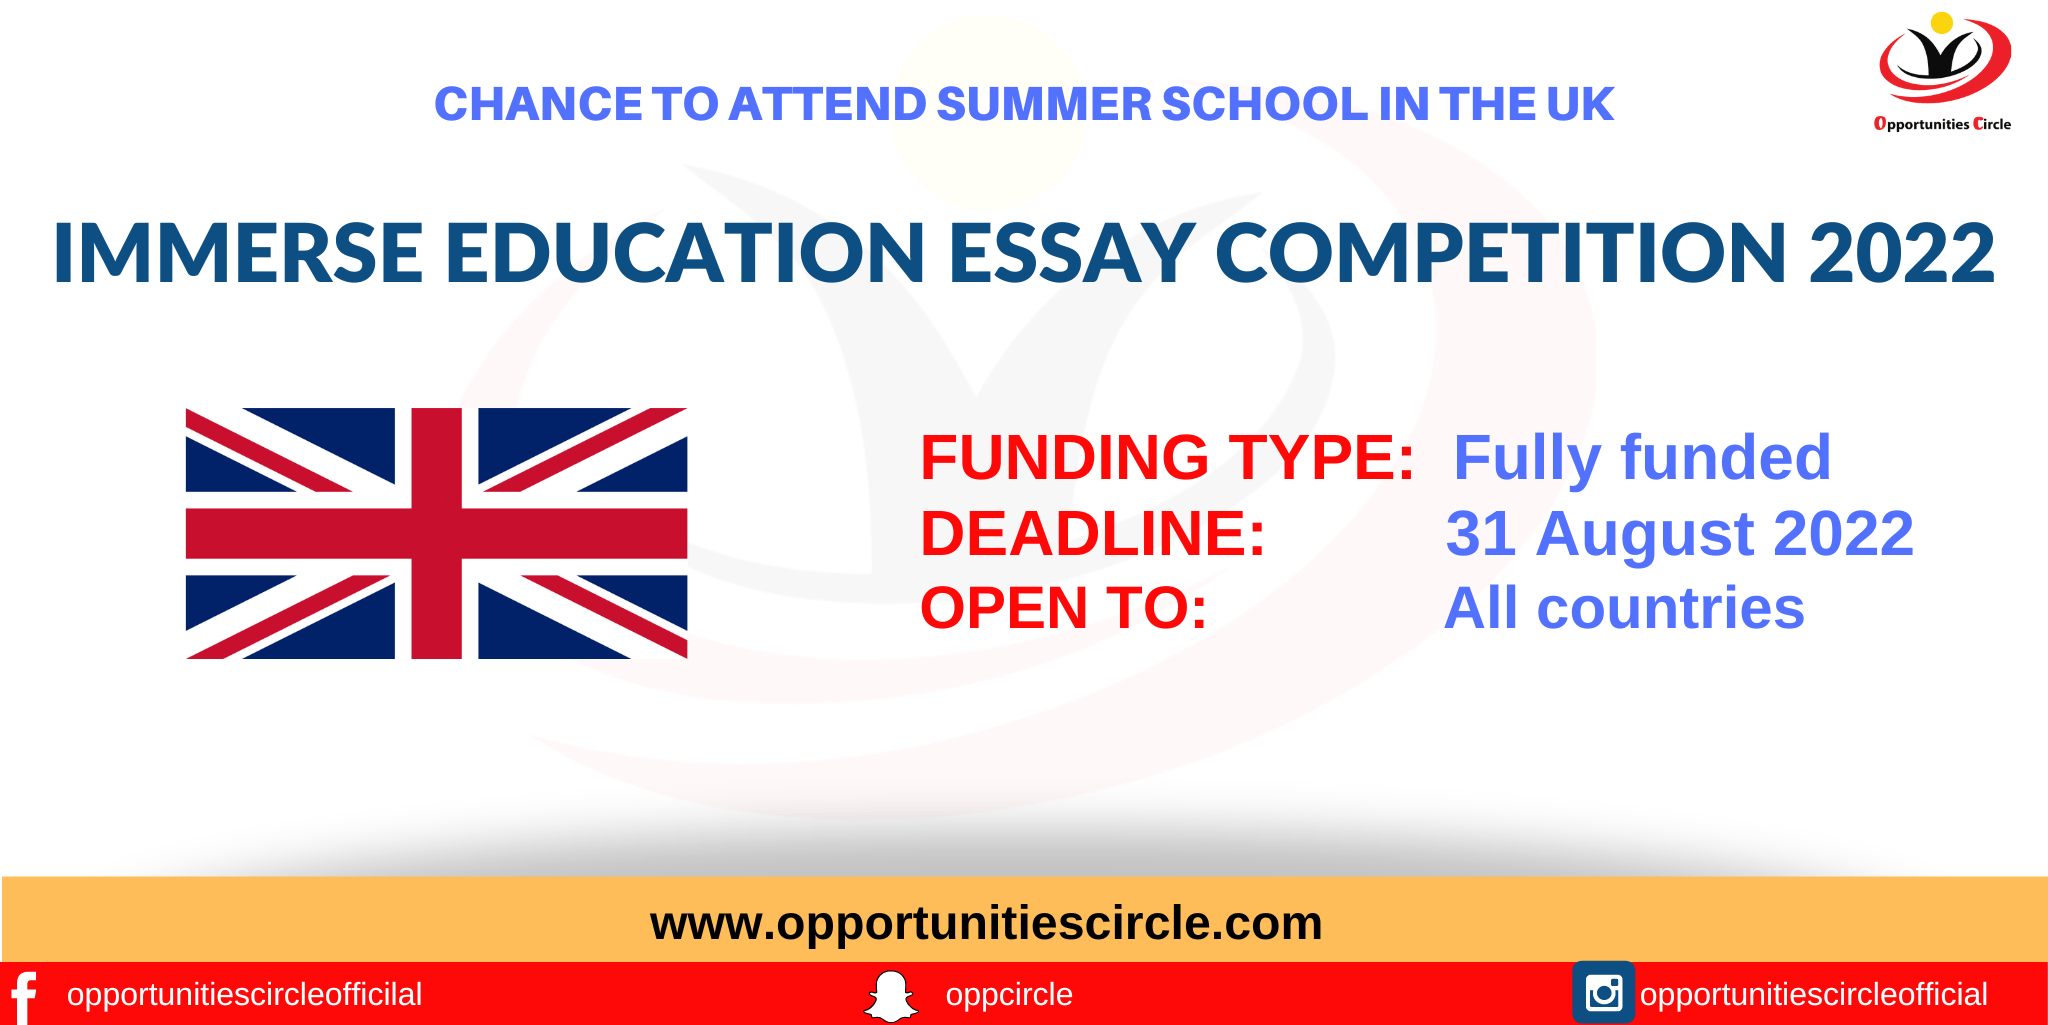 immerse education essay competition guide